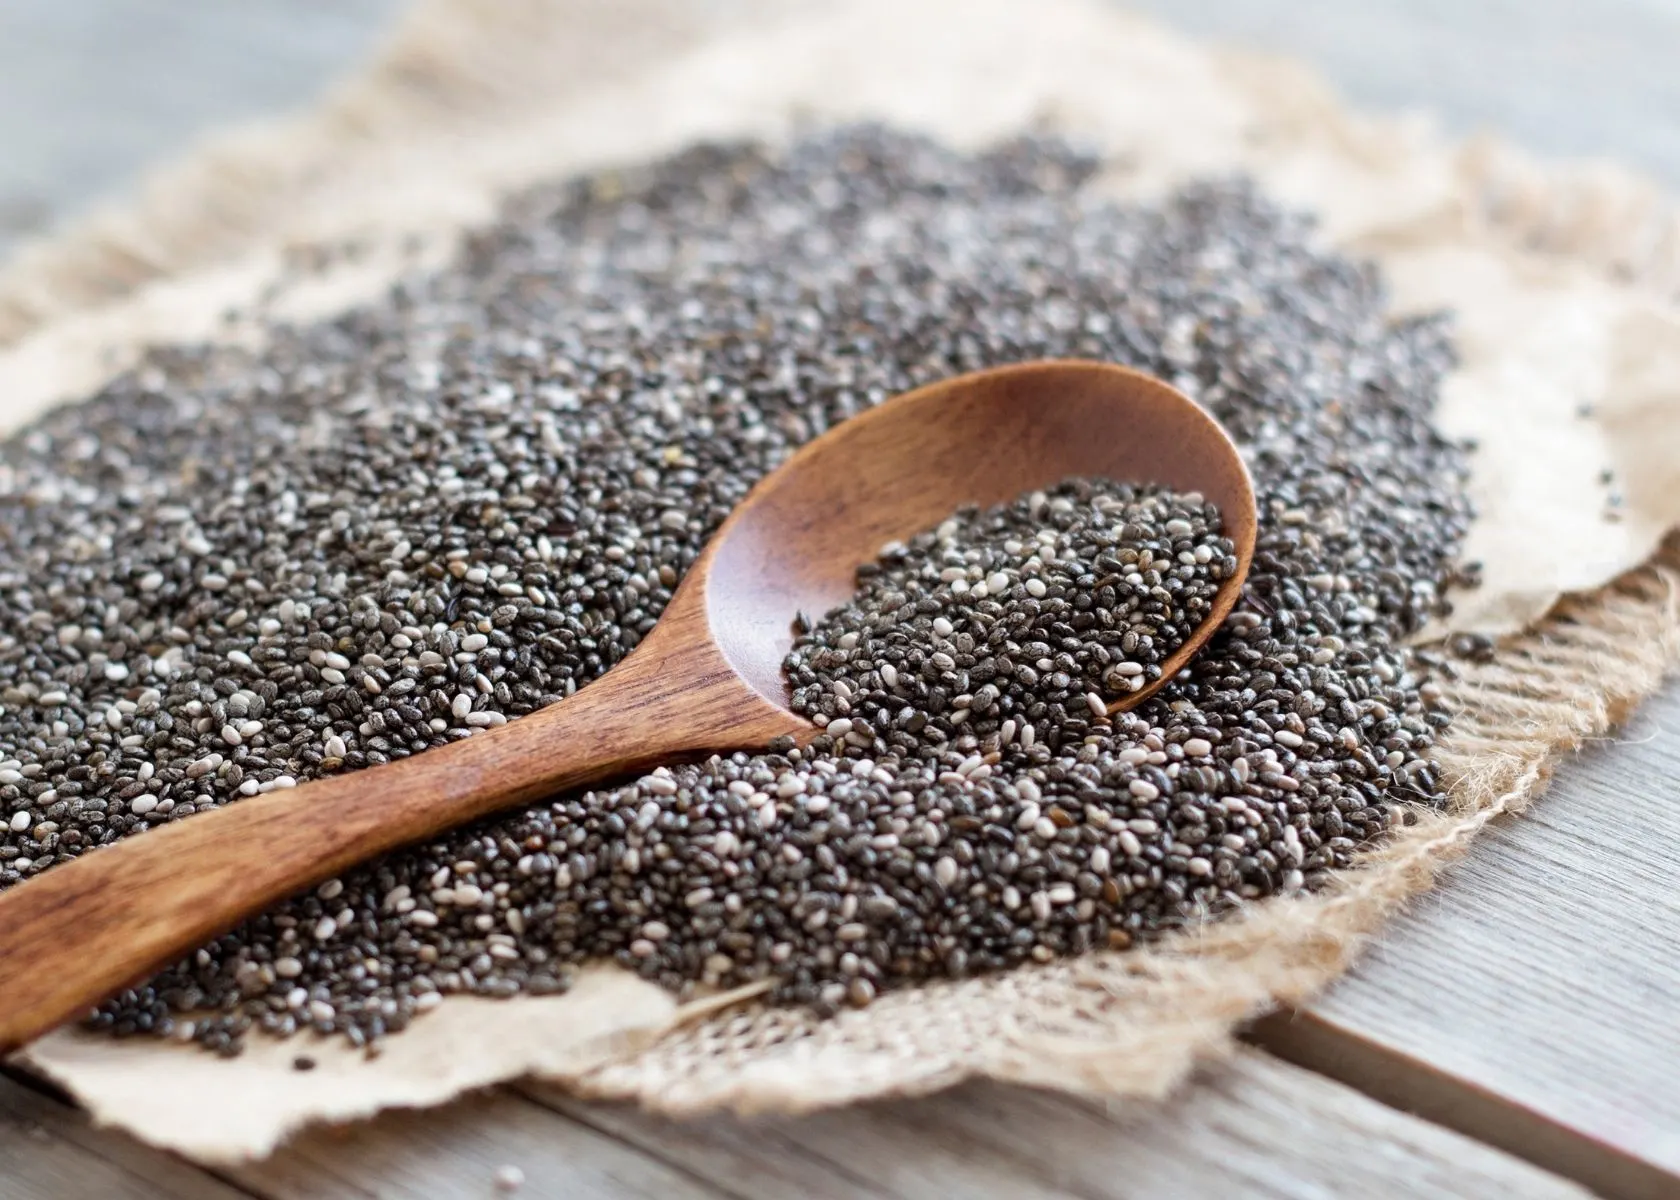 Large pile of chia seeds on burlap cloth with large wooden spoon.